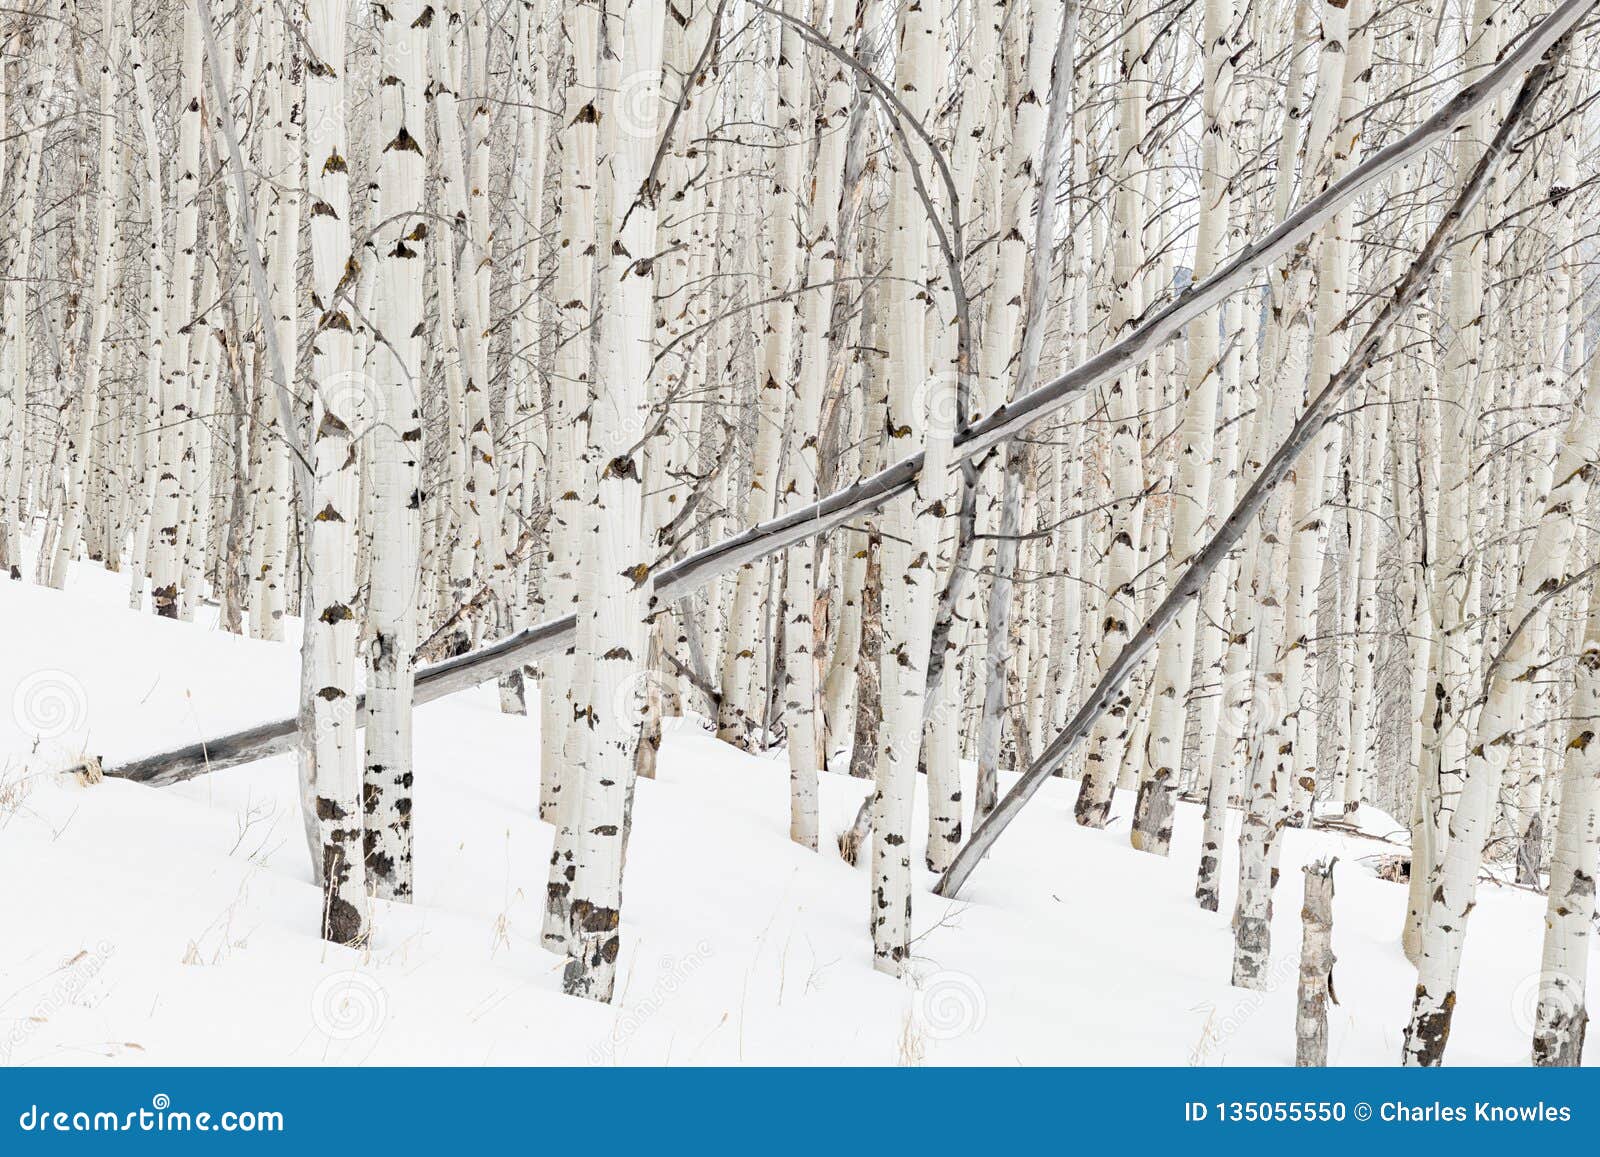 Aspen Forest in Winter with Many White Barked Trees Stock Photo - Image